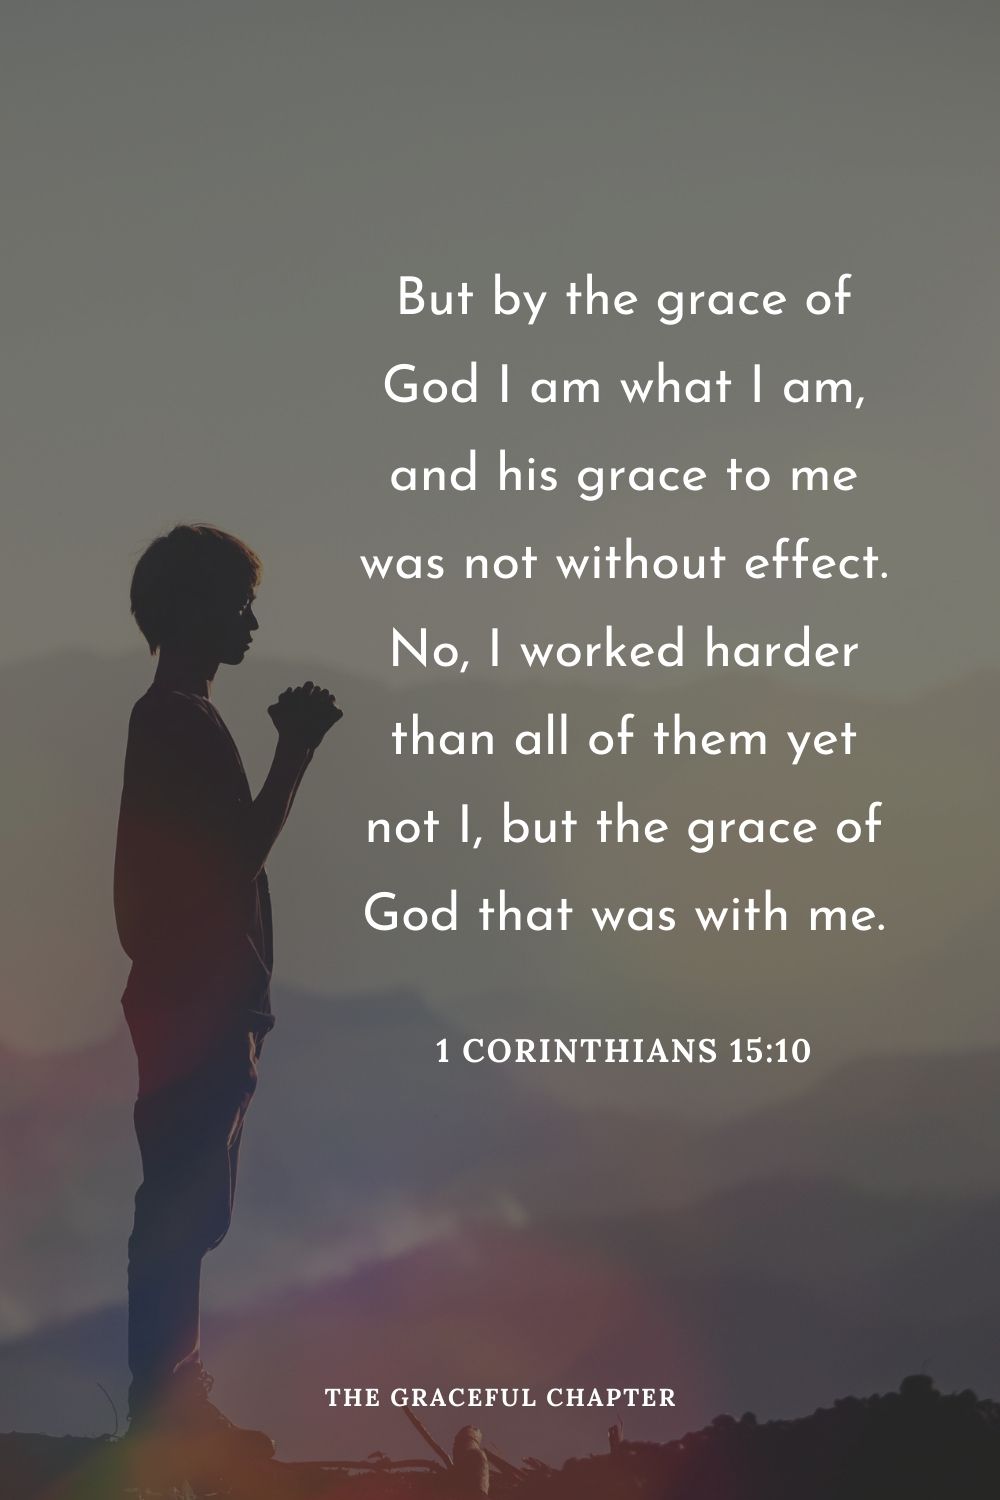 But by the grace of God I am what I am, and his grace to me was not without effect. No, I worked harder than all of them yet not I, but the grace of God that was with me.